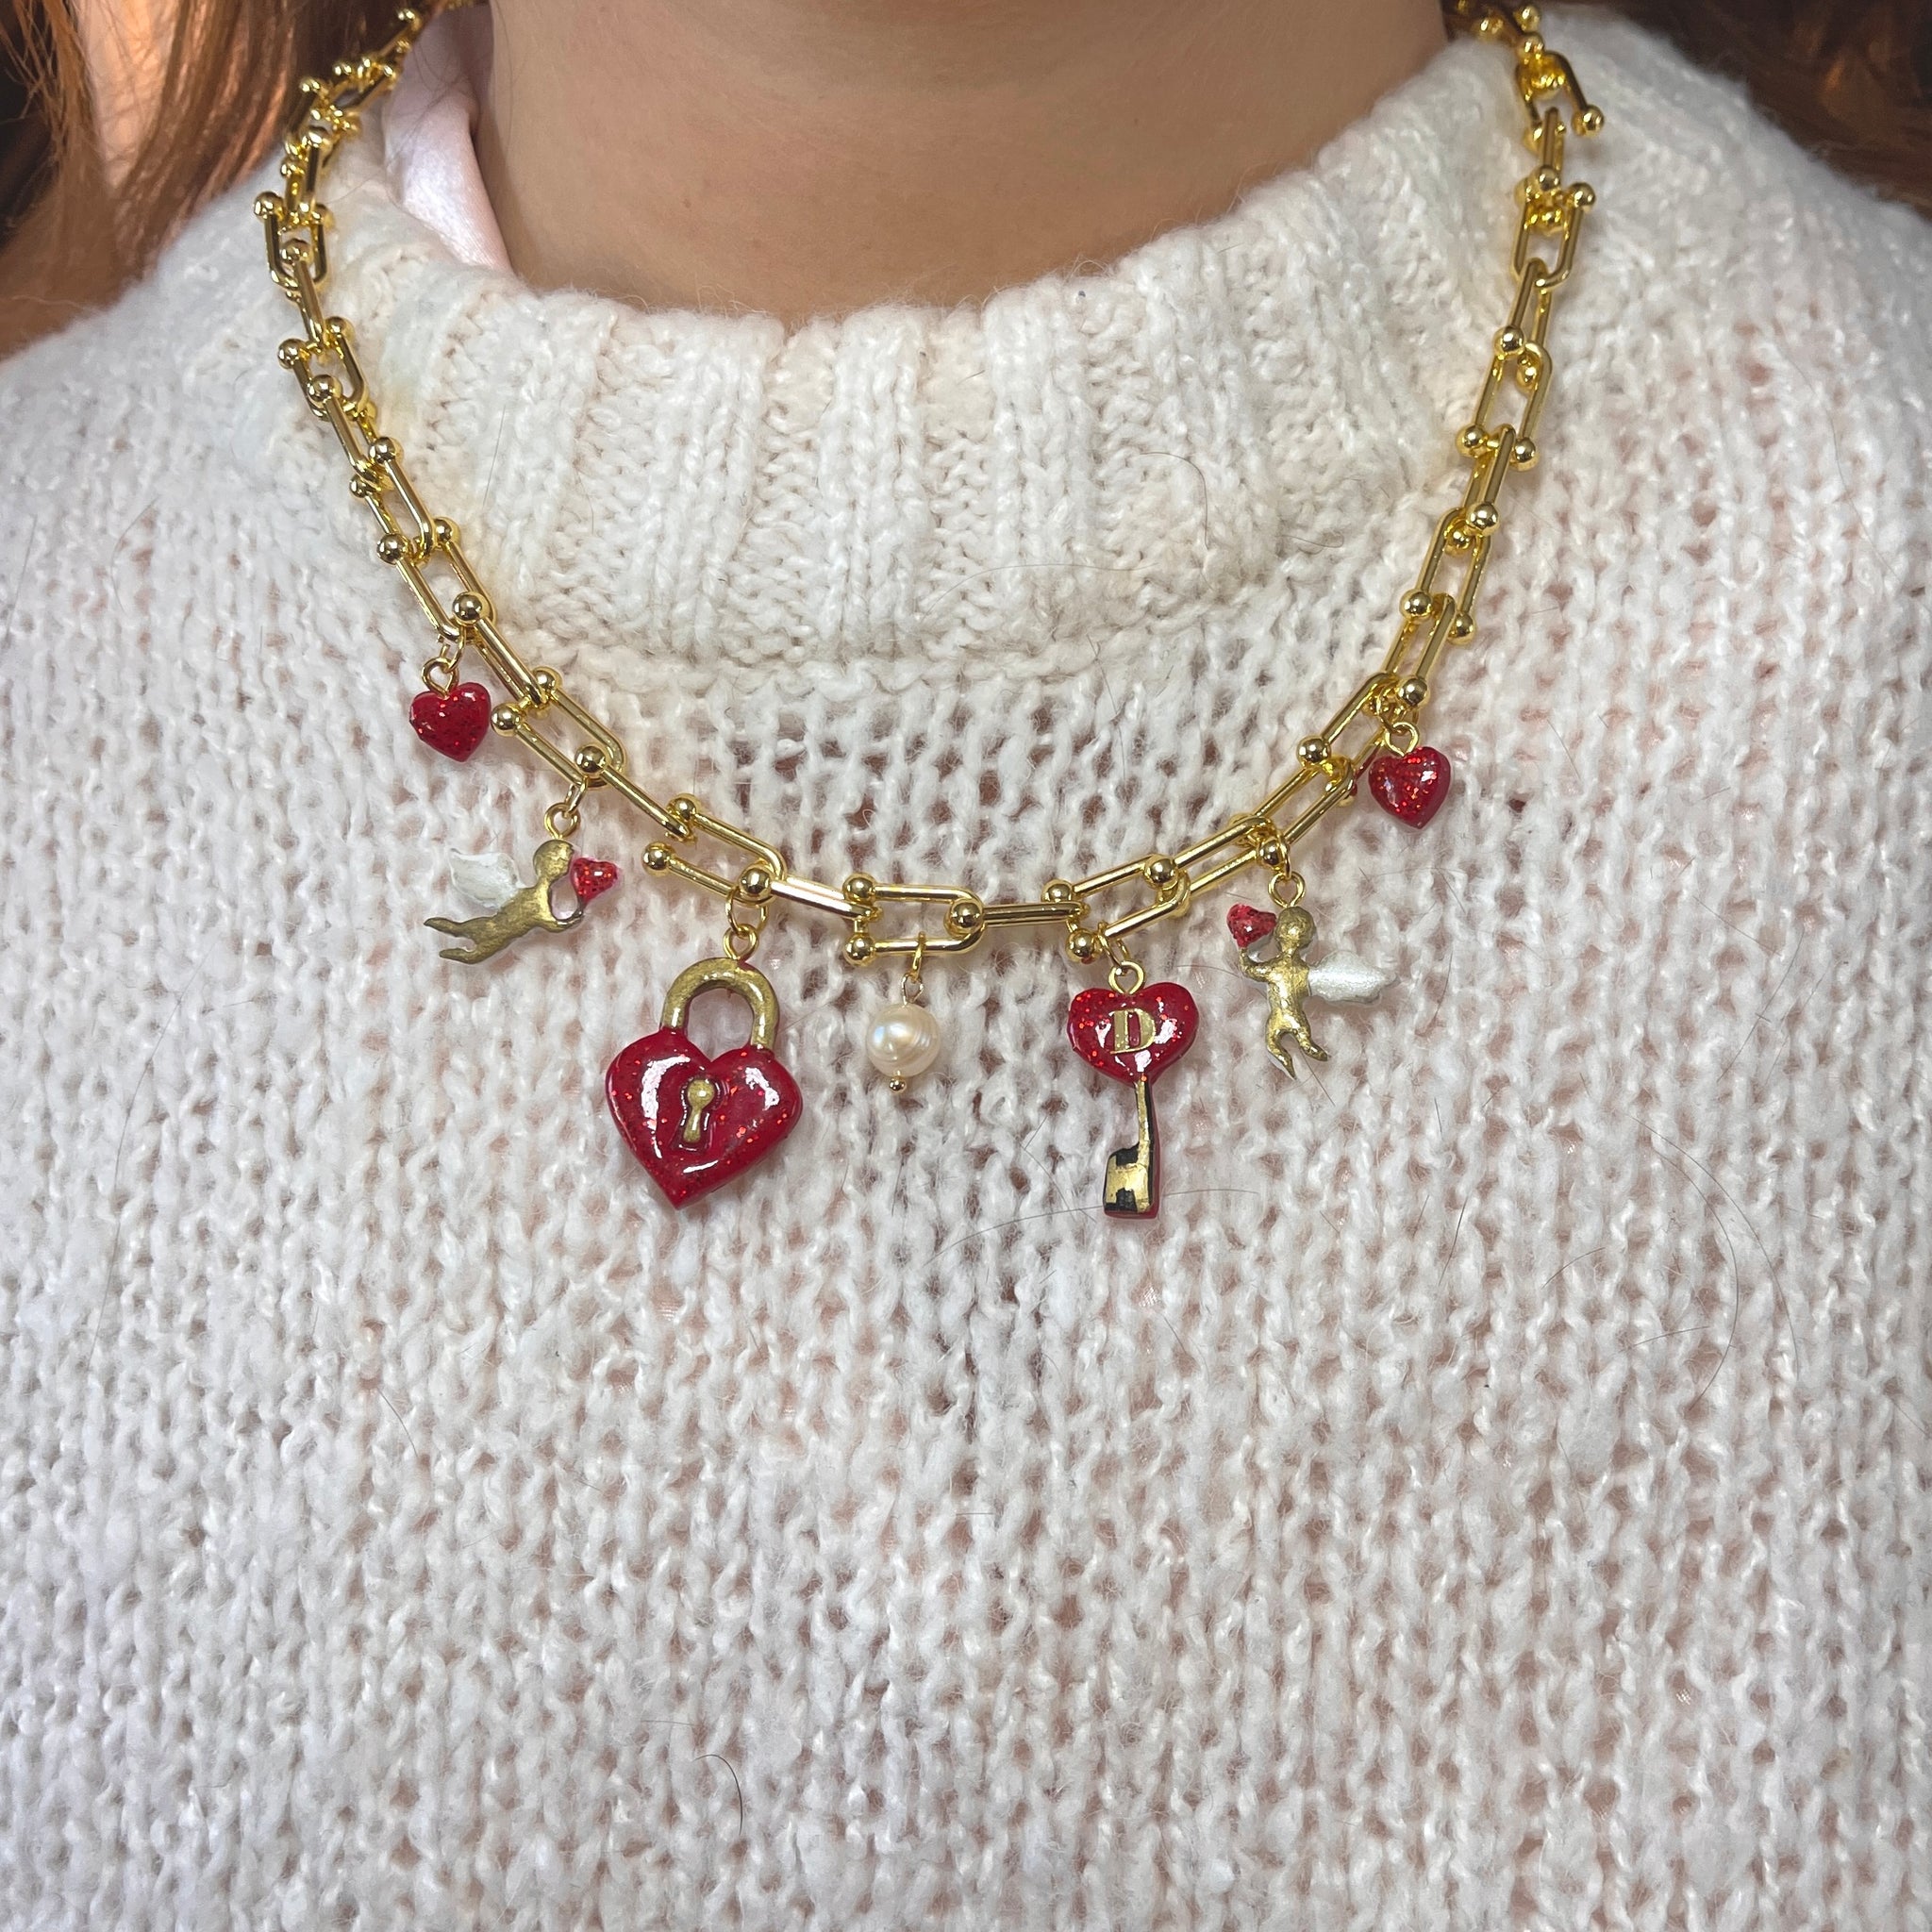 The Stupid Cupid Charm Necklace